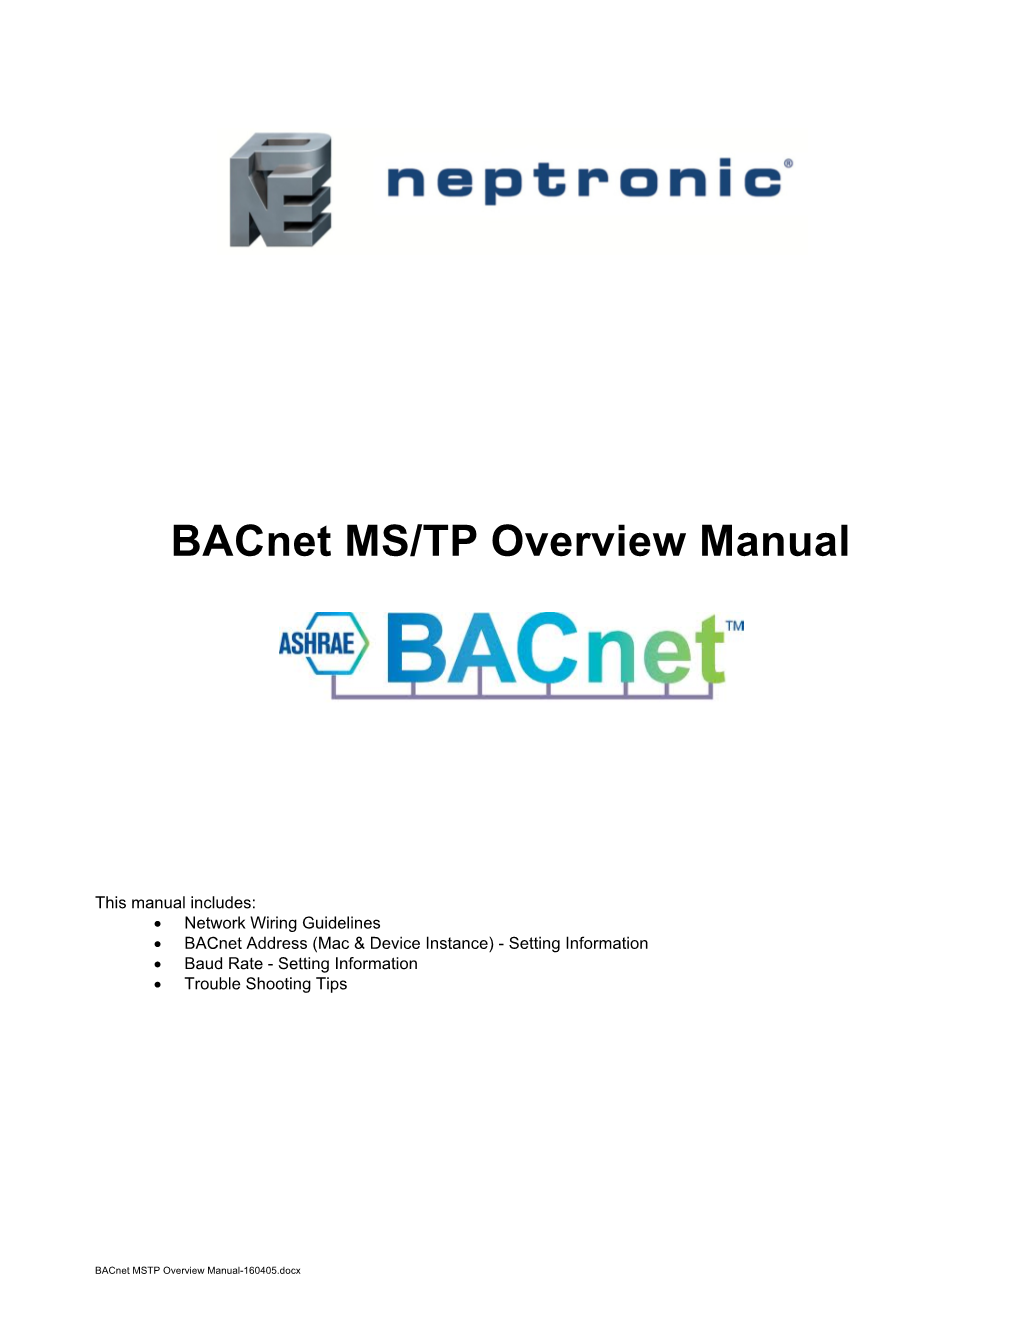 Bacnet Guide of the Device Used to Verify Which Services Are Supported